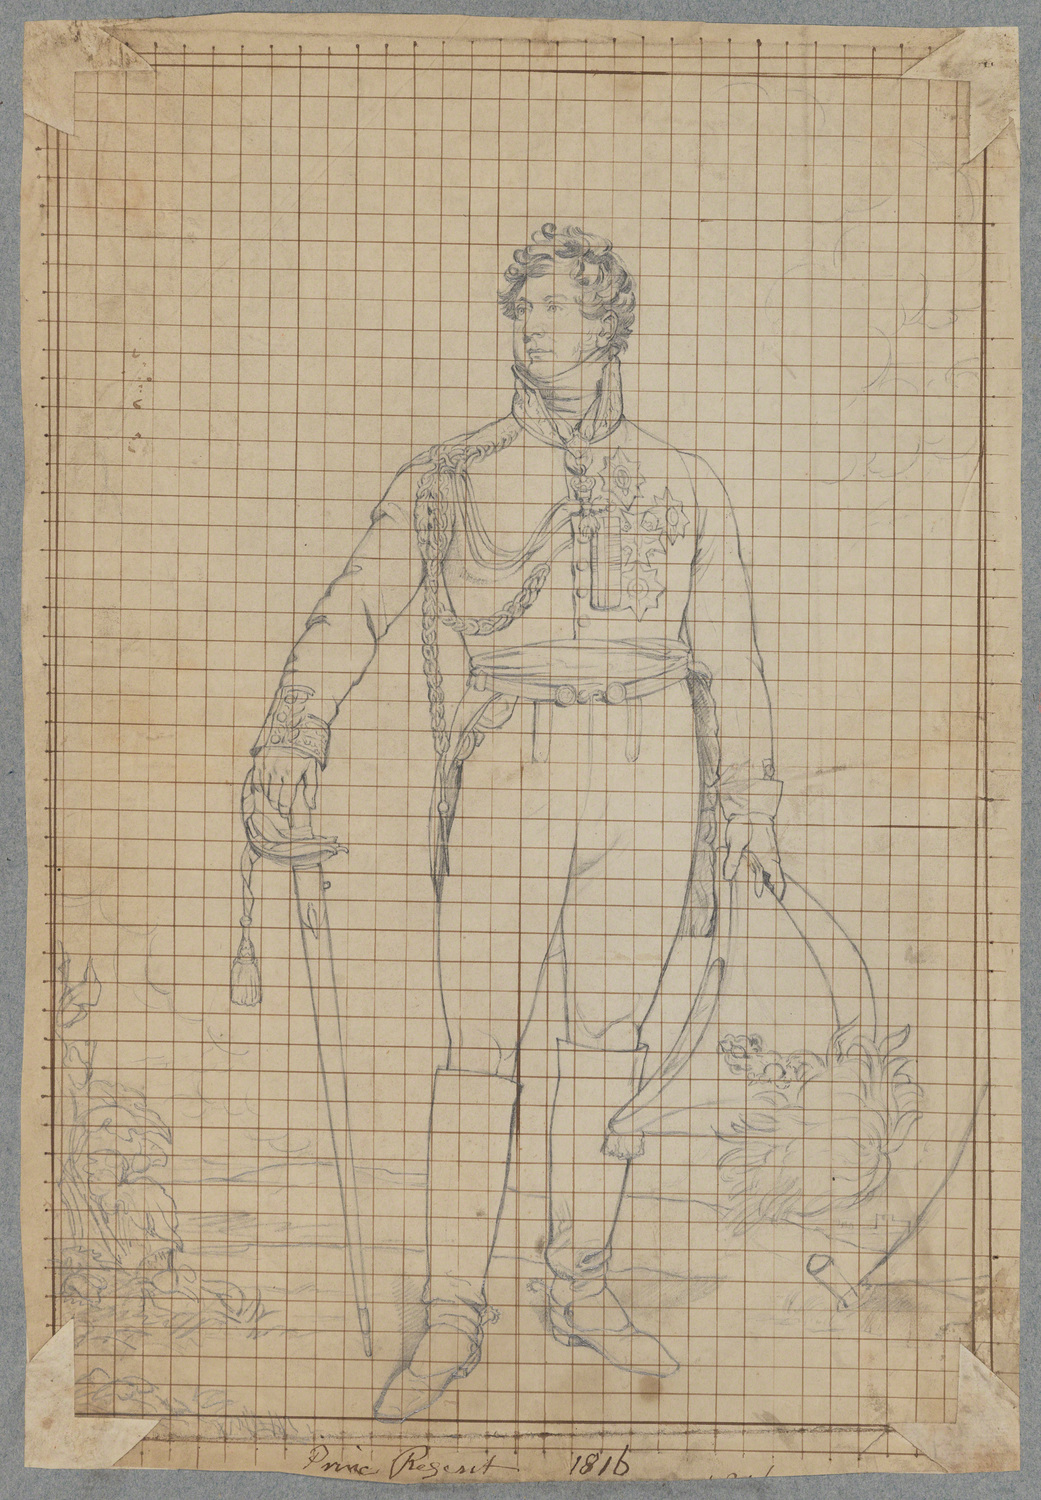 A pencil drawing on grided paper, depicting a standing man wearing a military uniform and holding a sword in one hand and a hat in the other.